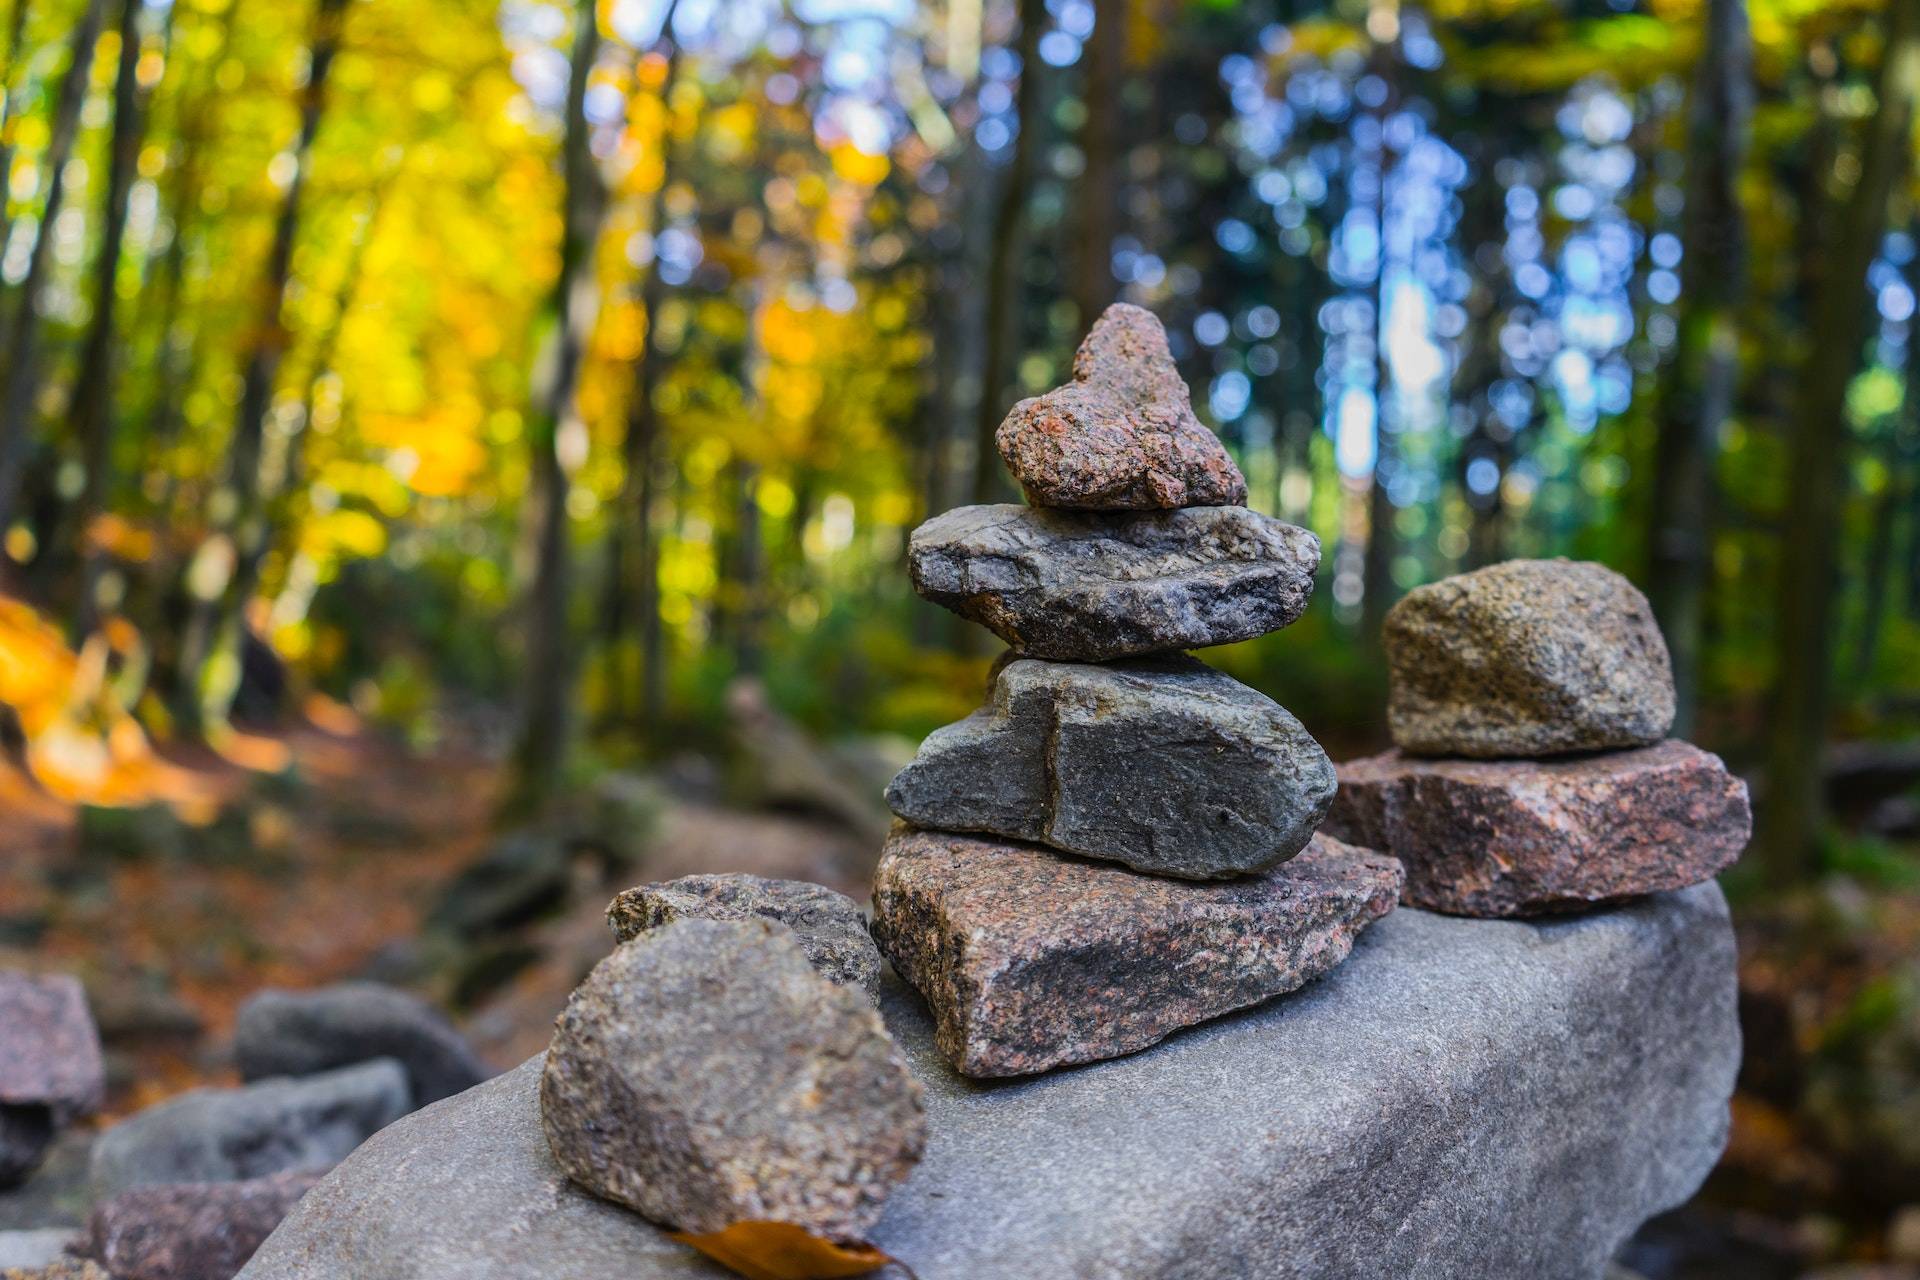 A stack of rocks in a forest, captured and showcased through a WordPress website.